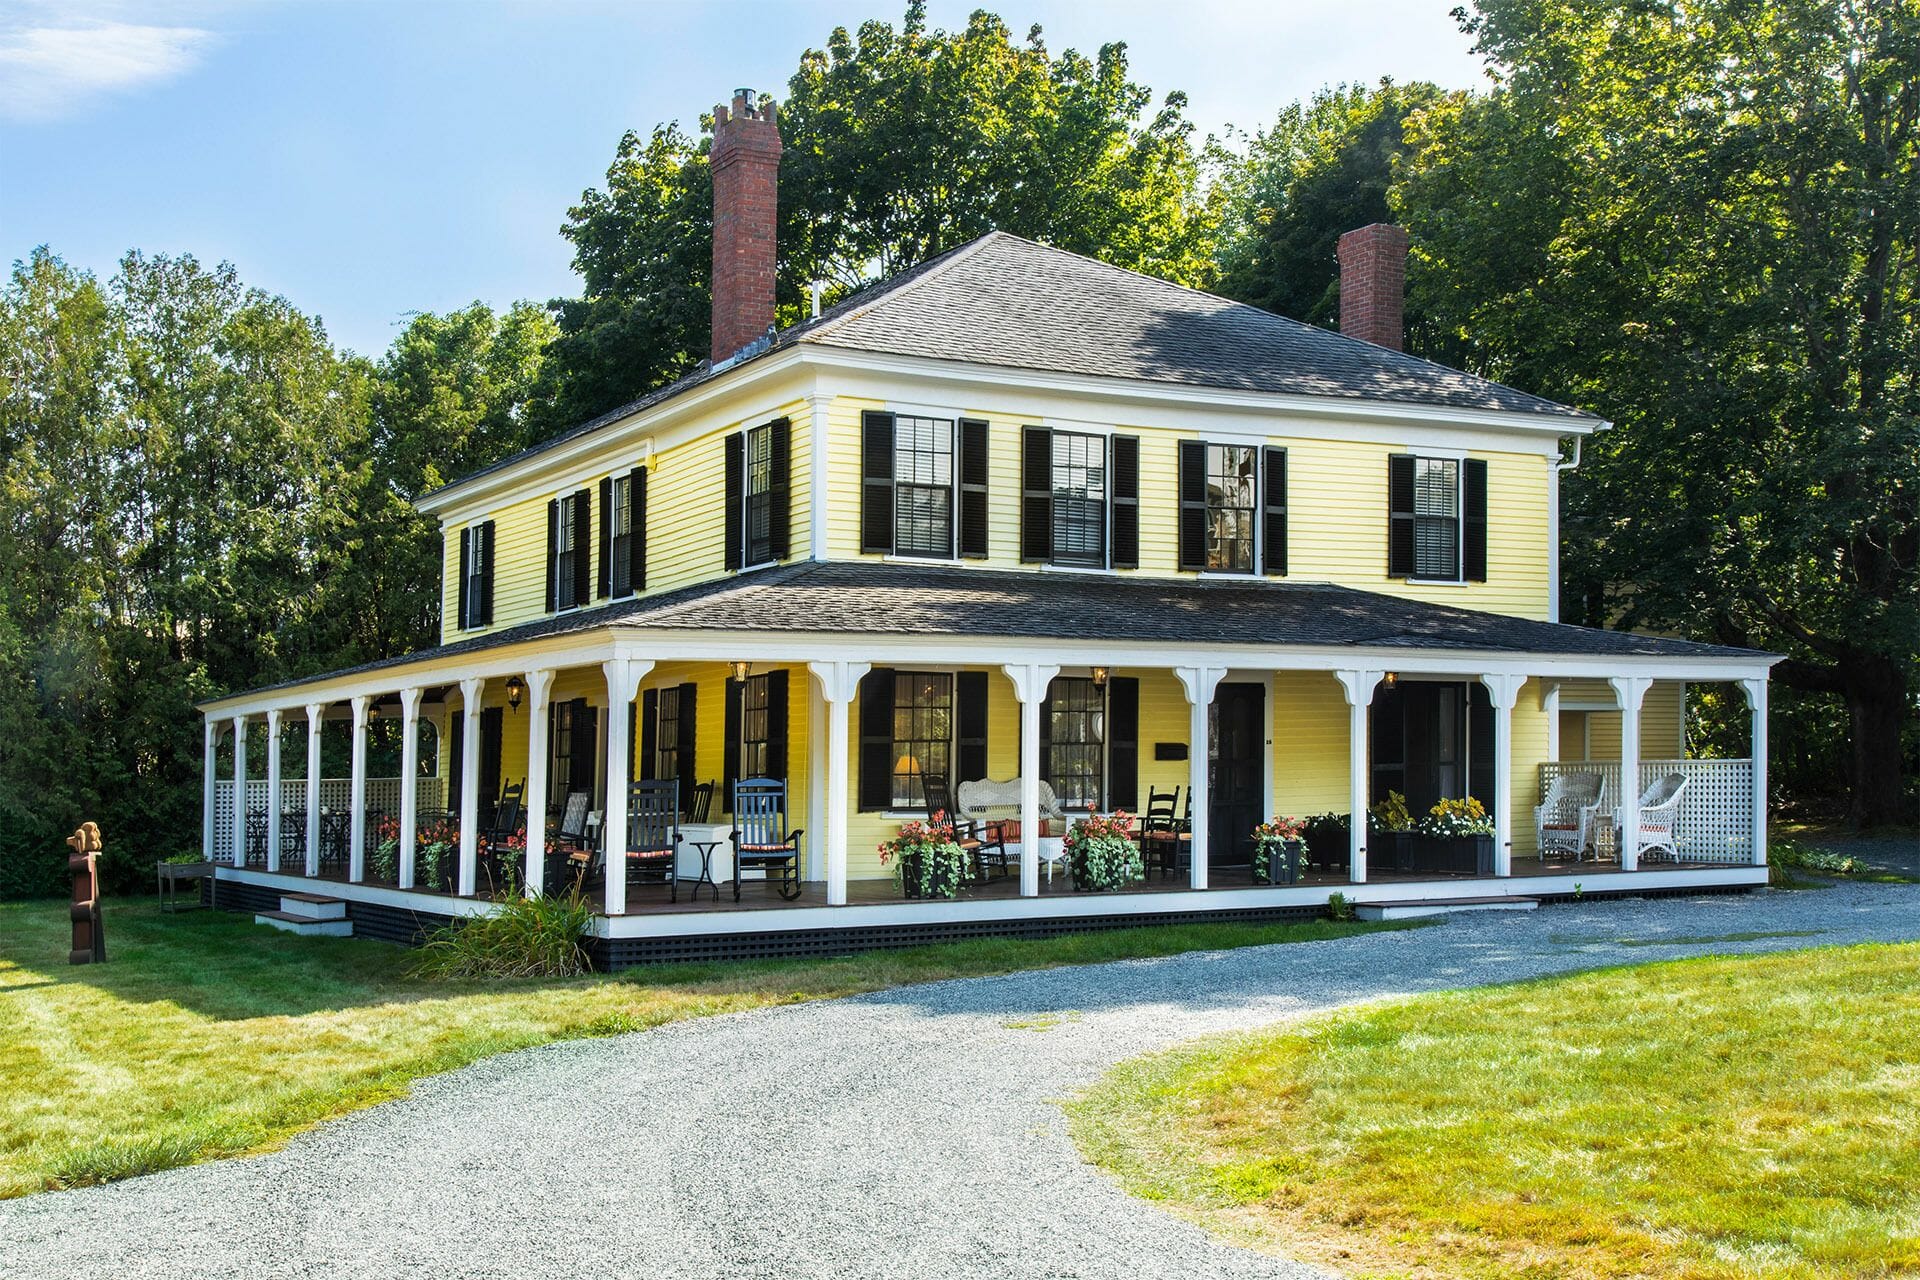 Building view of Yellow House Inn